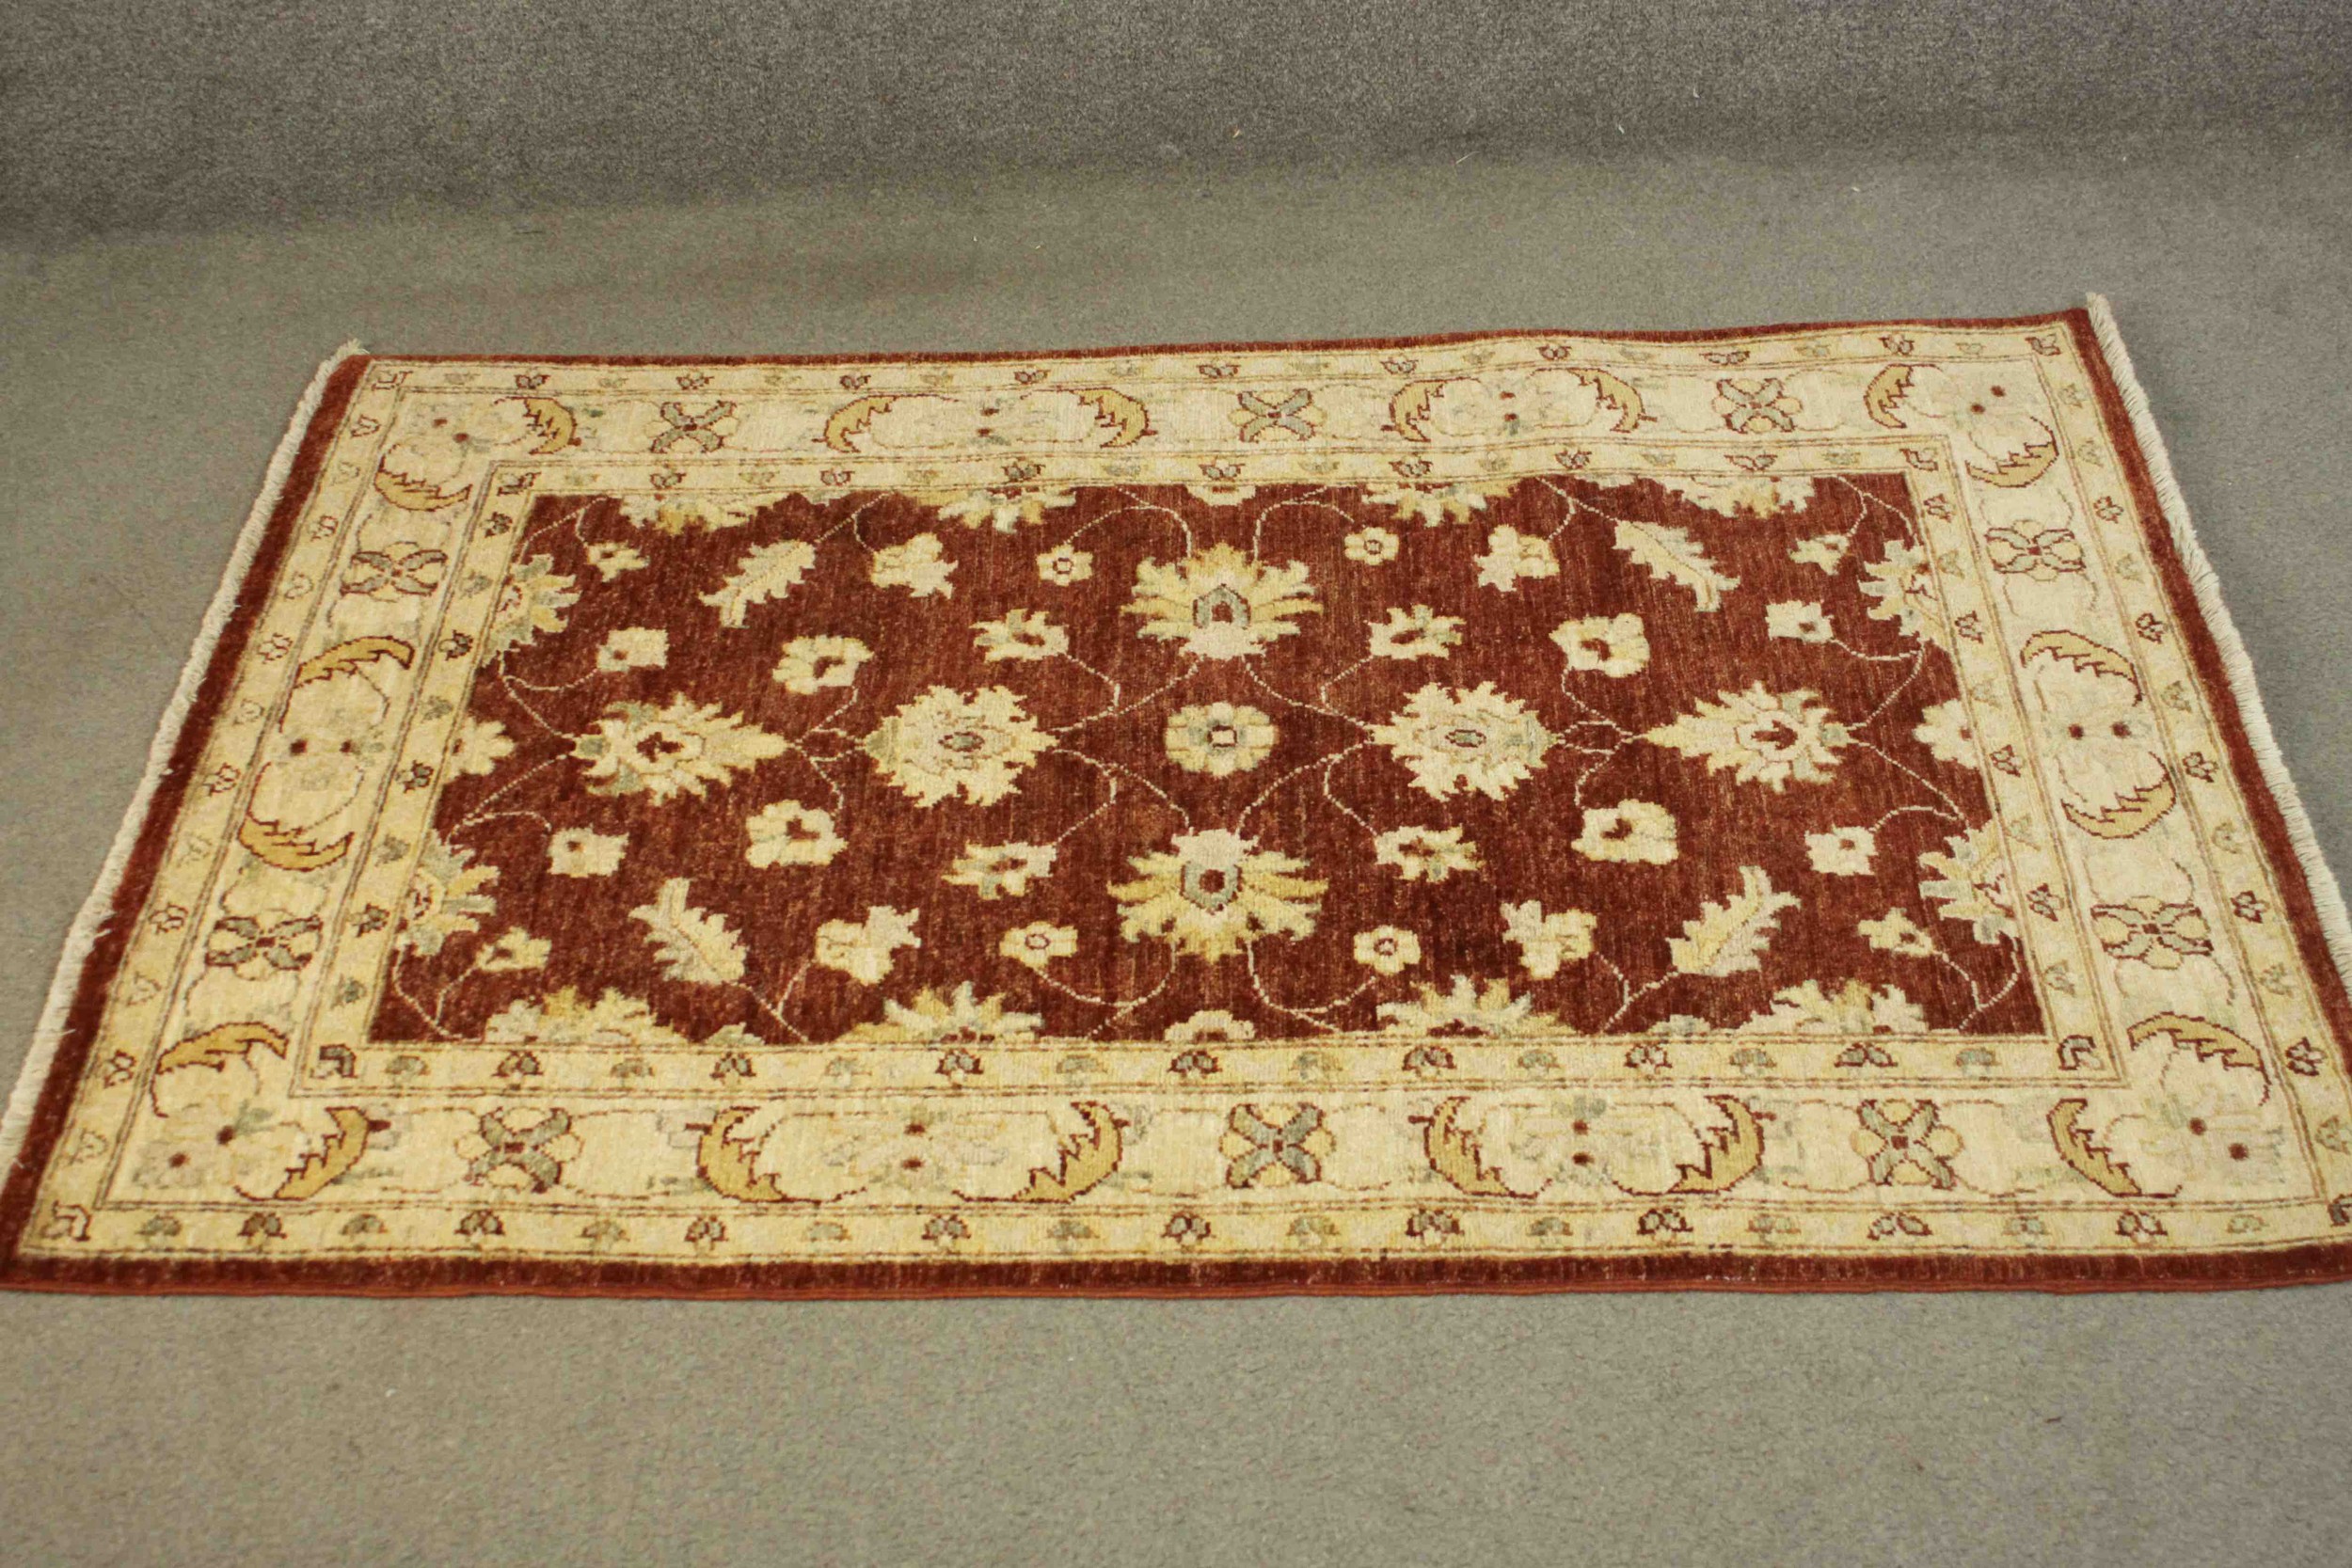 A Ziegler style rug with repeating foliate motifs on a burgundy field within serrated palm